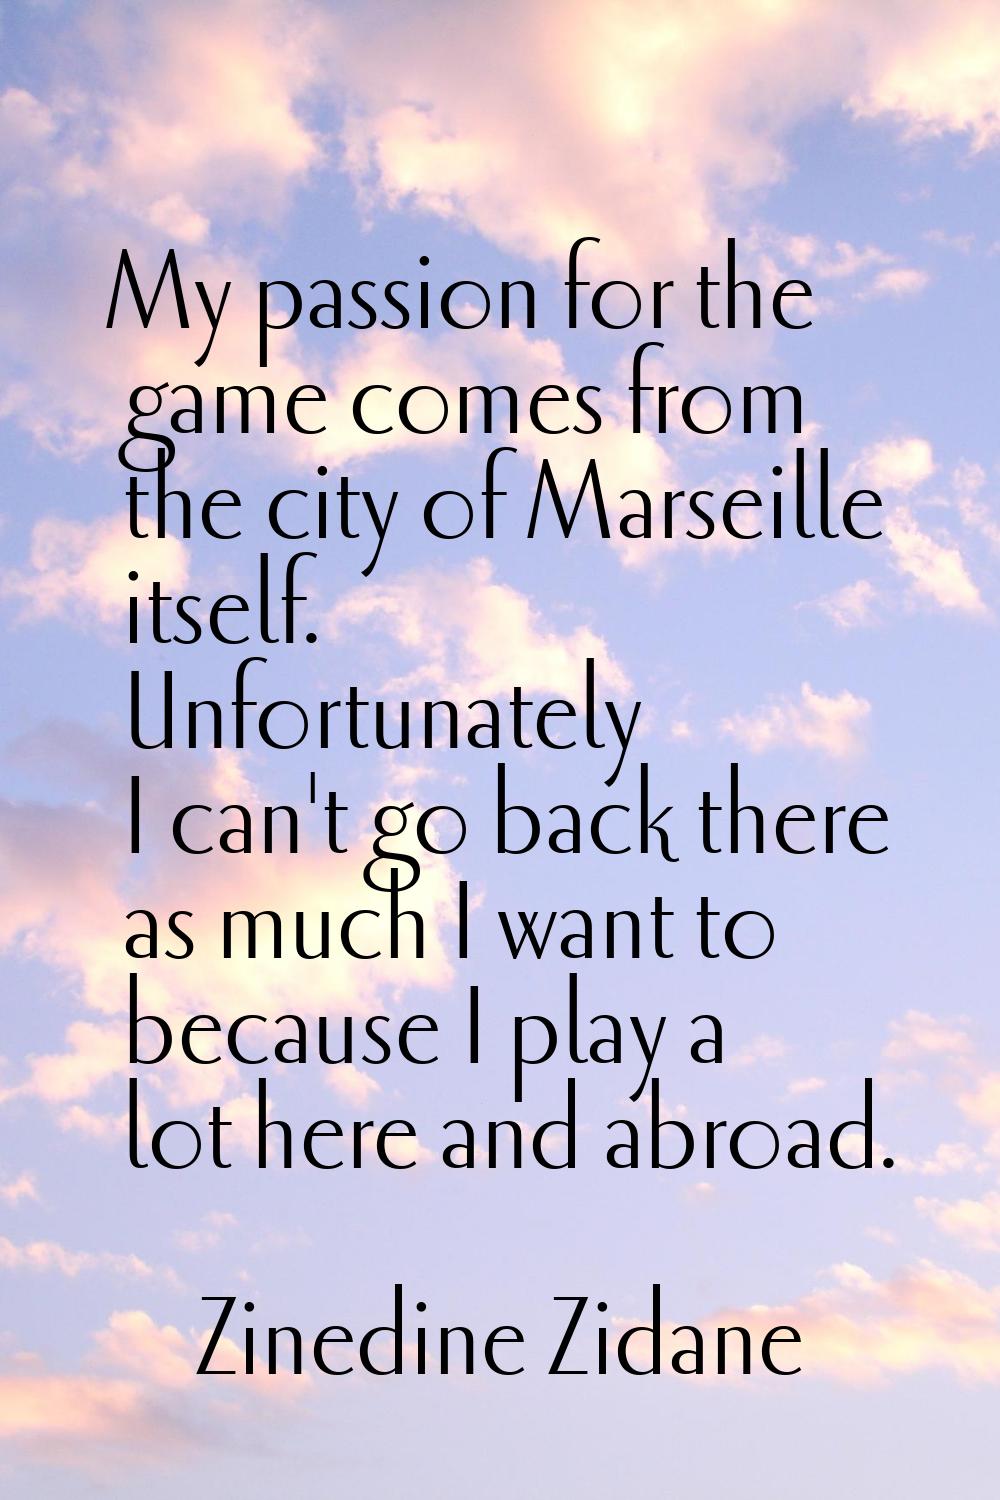 My passion for the game comes from the city of Marseille itself. Unfortunately I can't go back ther